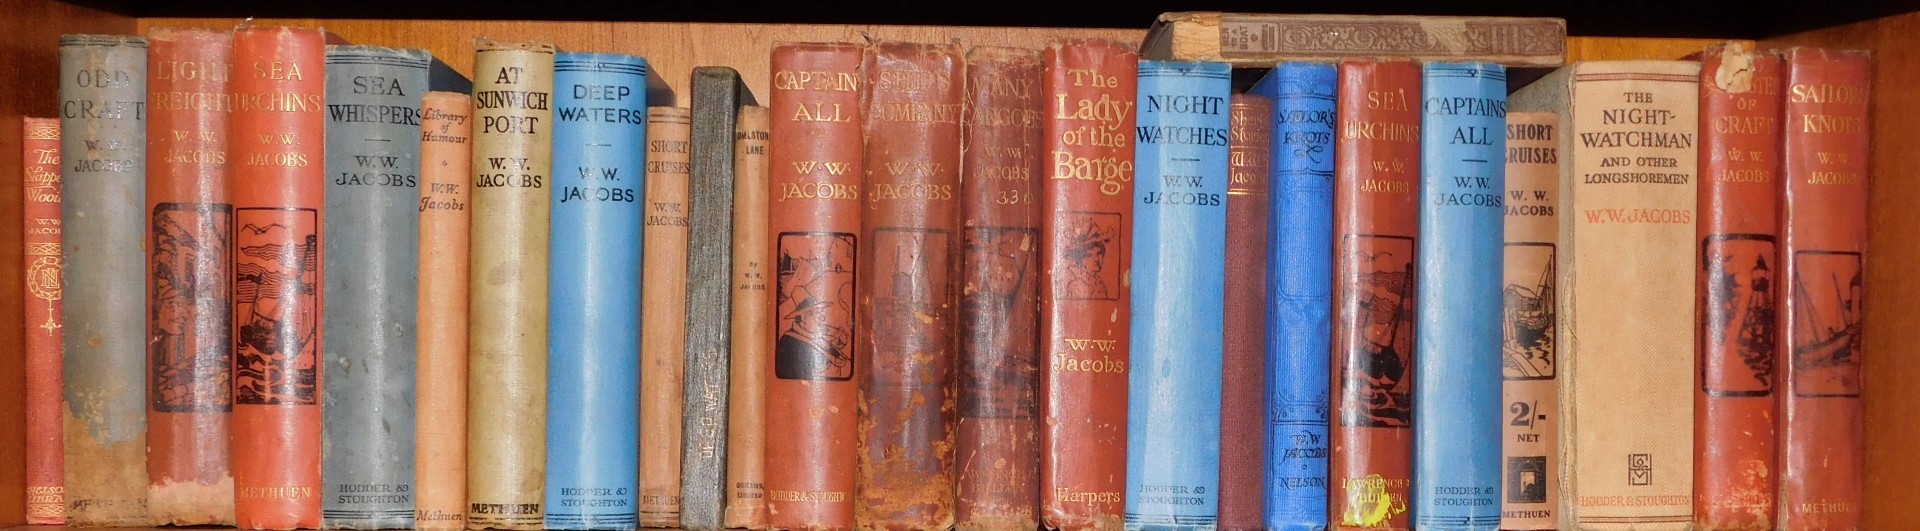 Jacobs (WW). The Night Watches, The Lady of the Barge, etc., various volumes. (1 shelf) - Image 3 of 5